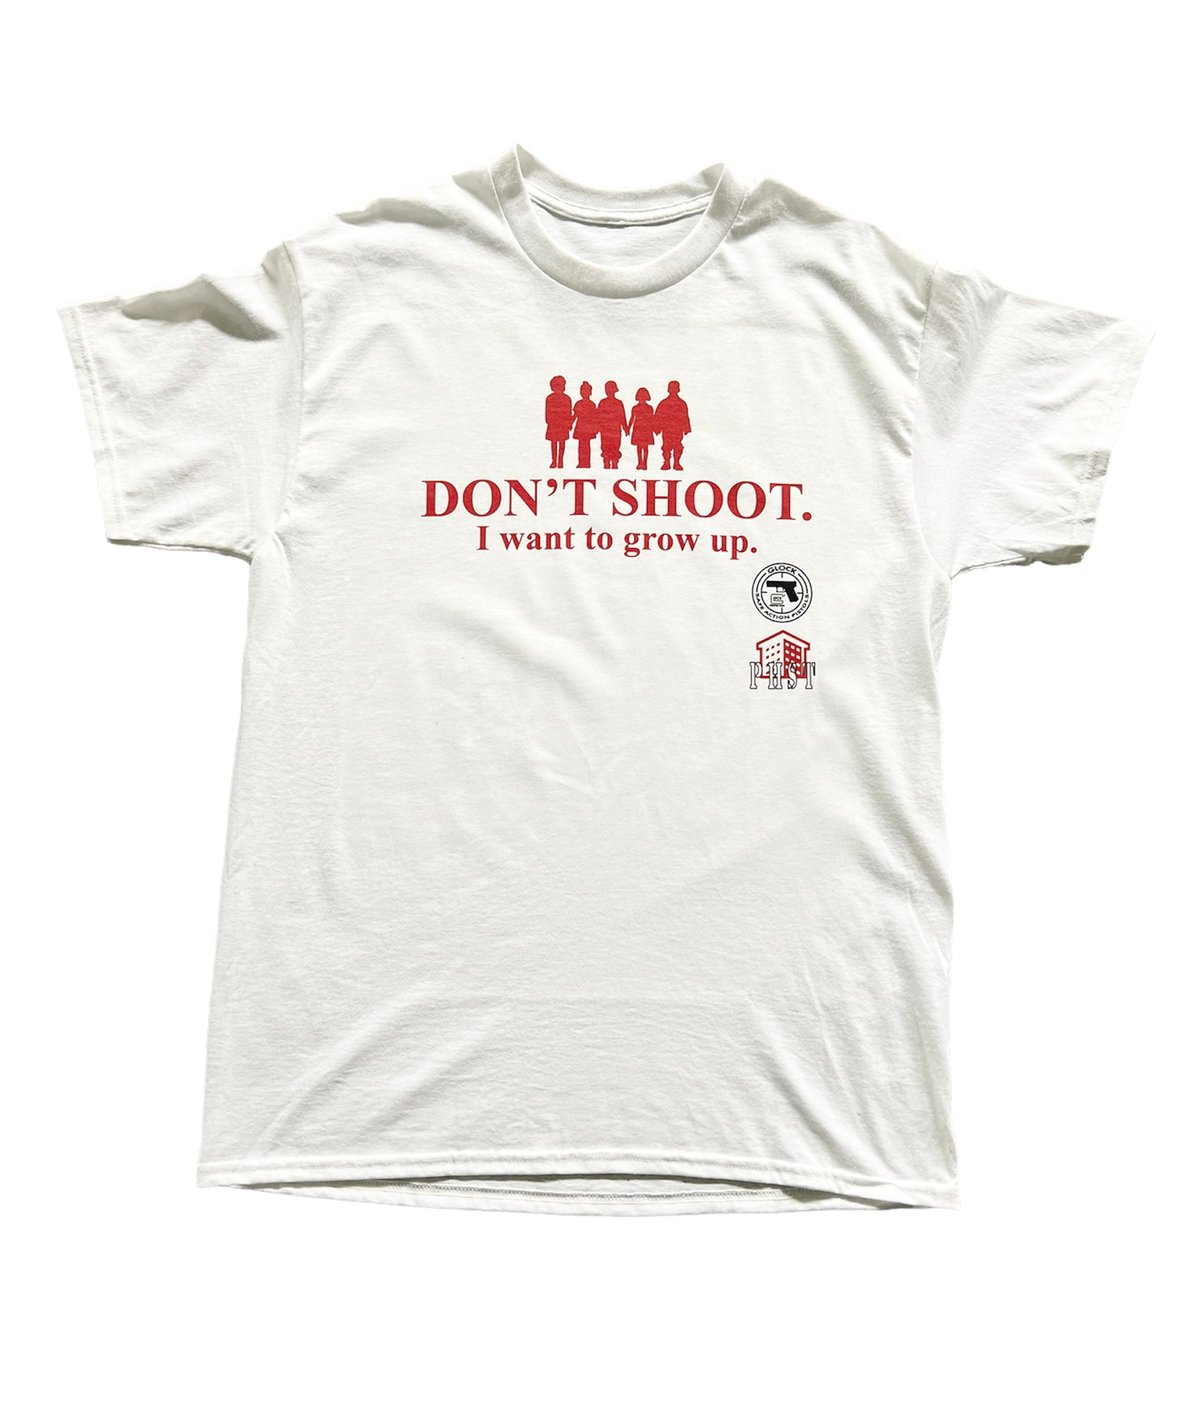 Image of “DON’T SHOOT I WANT TO GROW UP” T-Shirt @tommyvercetti_  X PHST